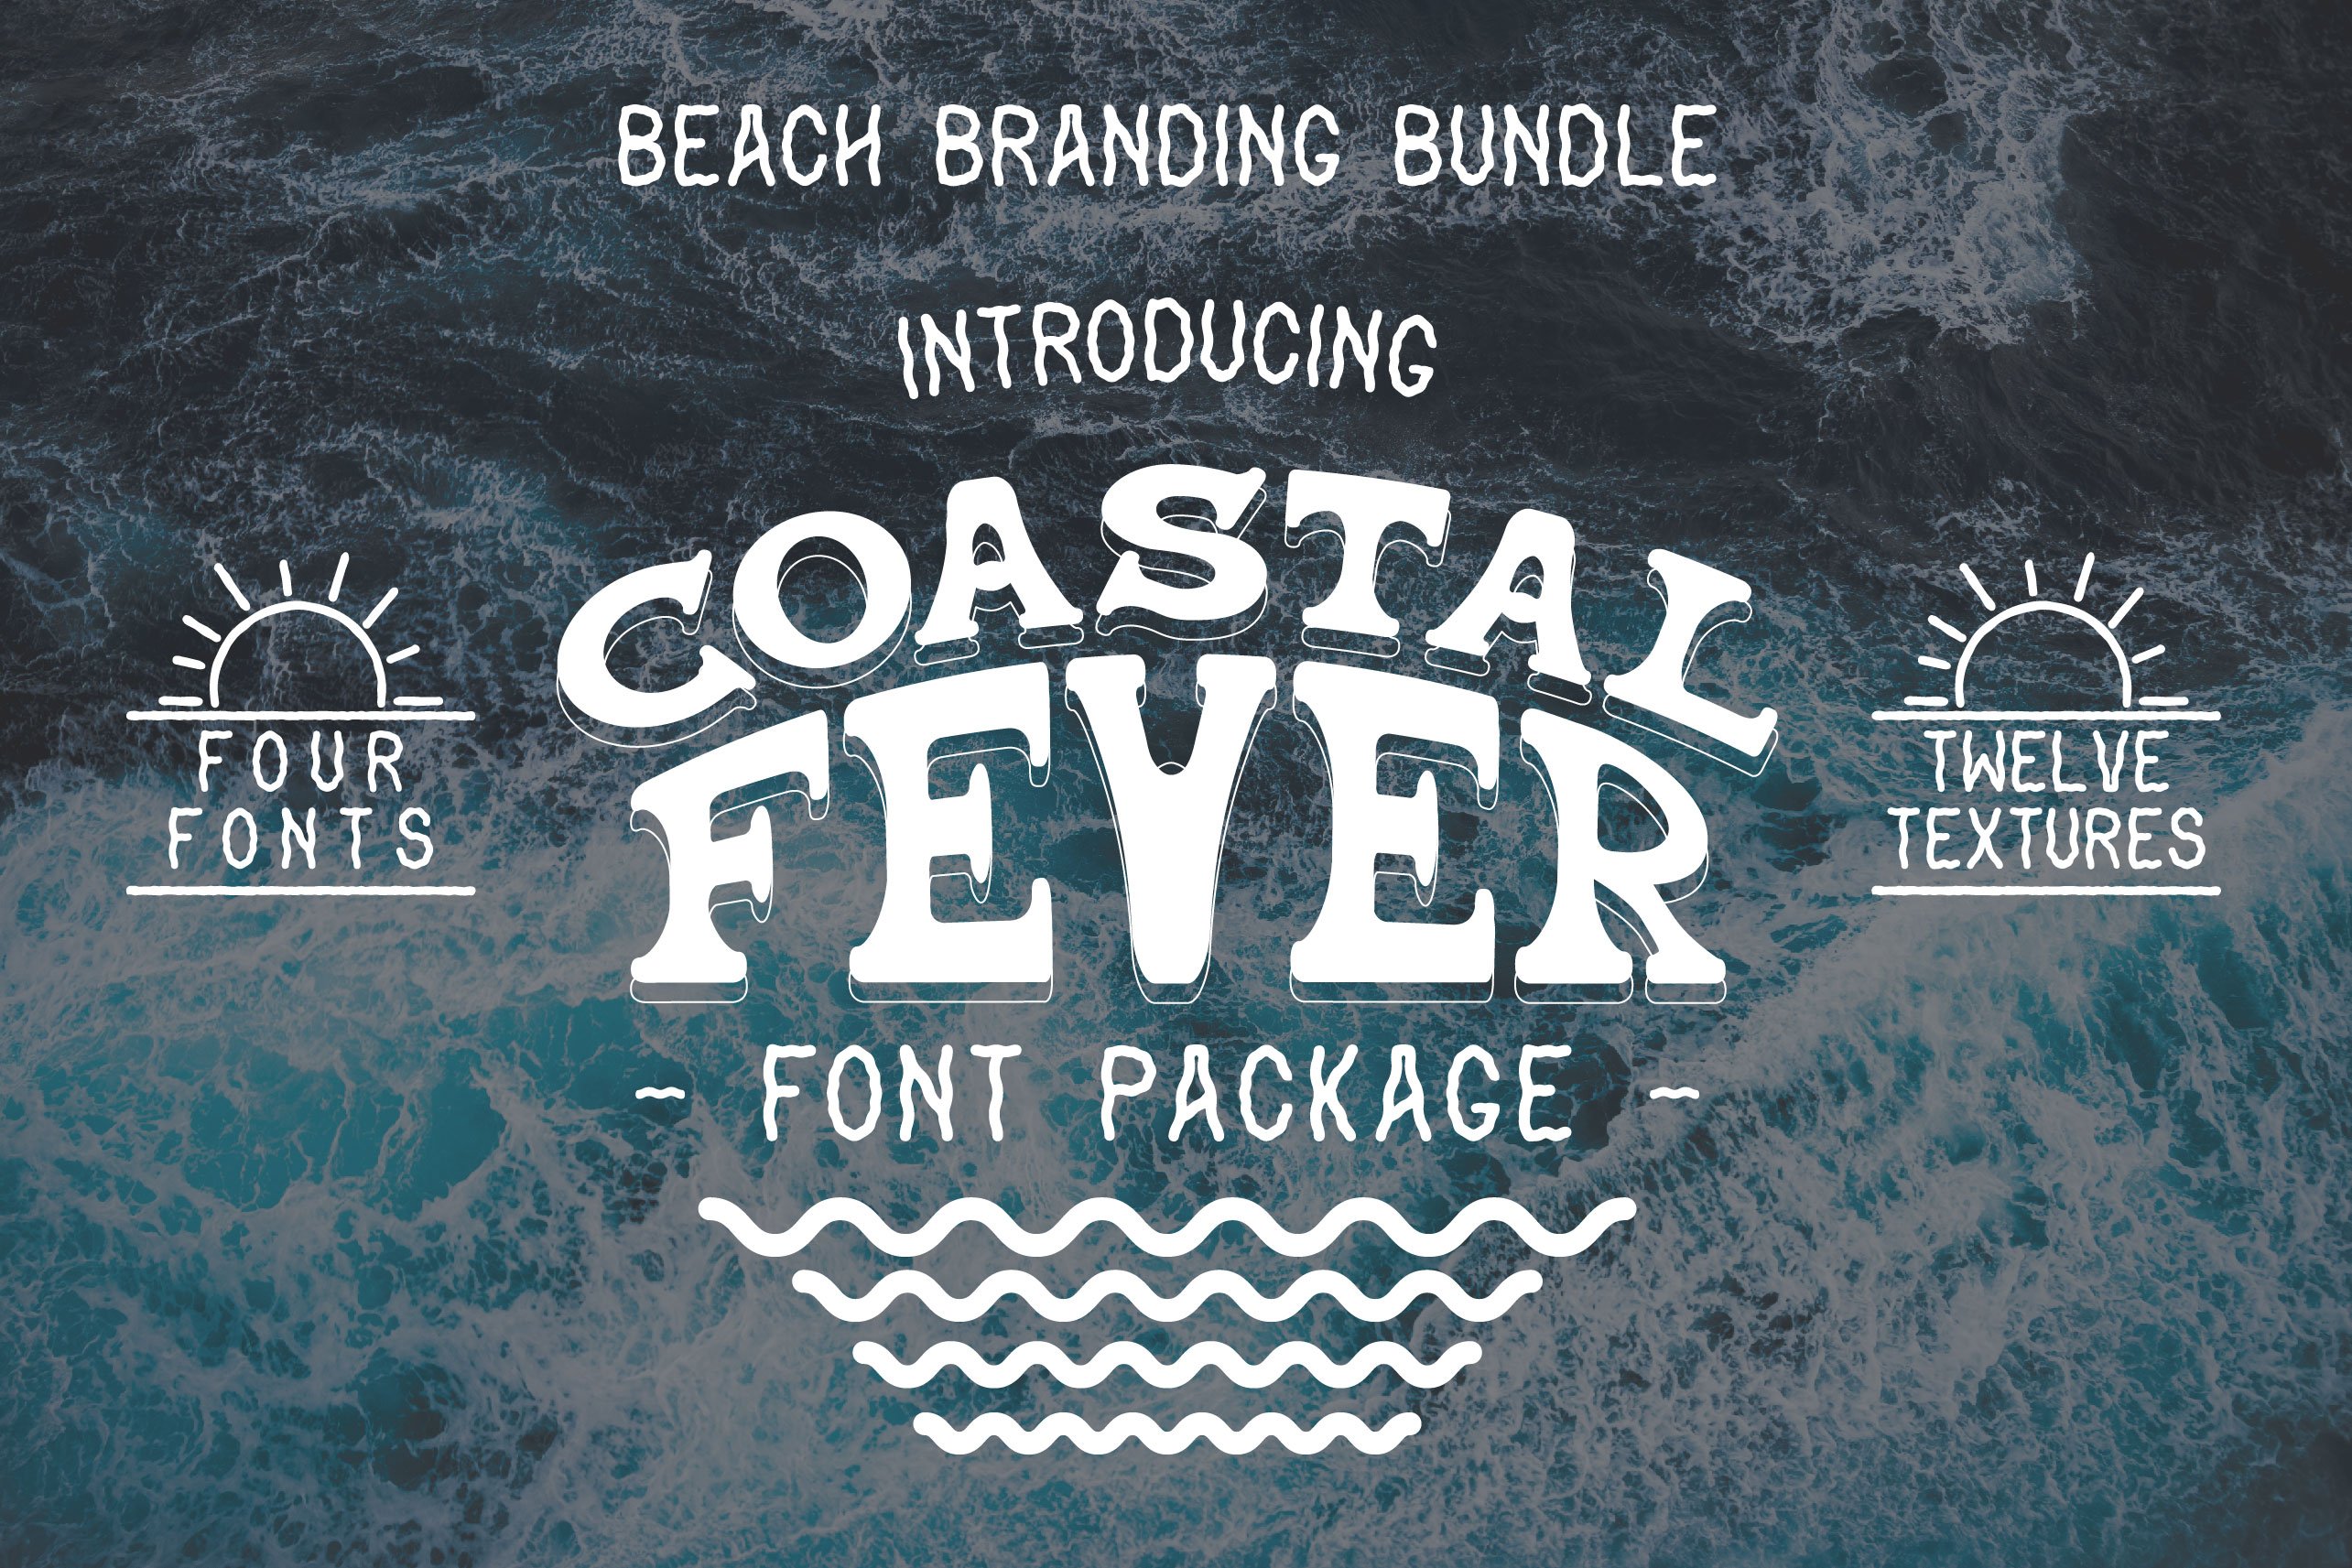 Coastal Fever - Font pack + Textures cover image.